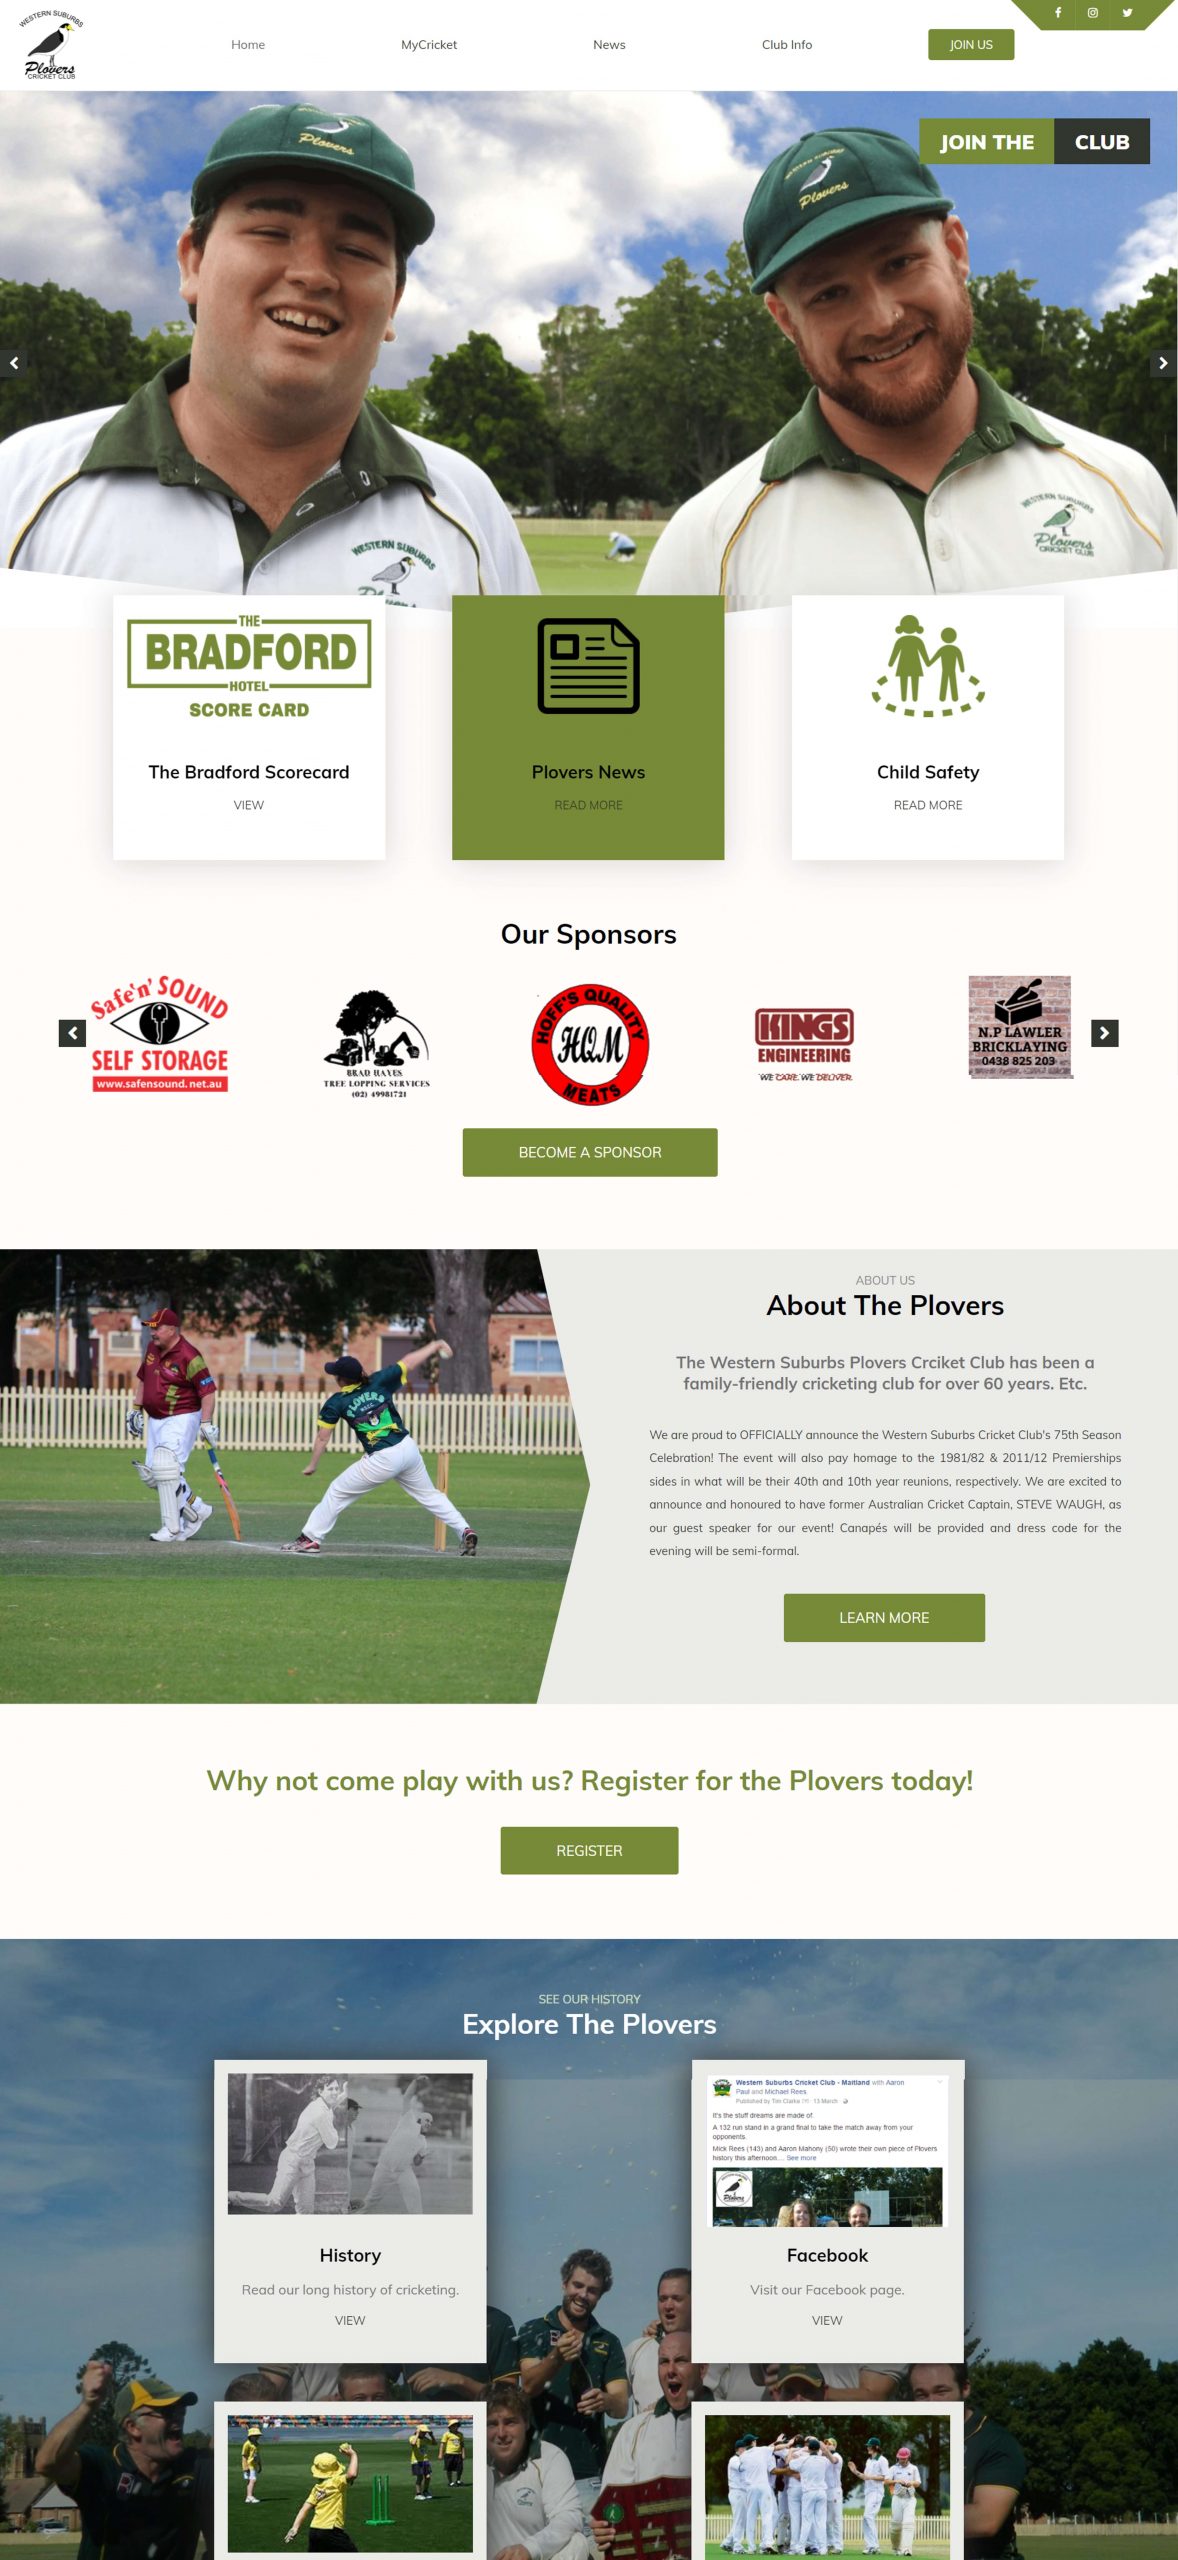 The result of the website migration of the Plovers Cricket Club Website